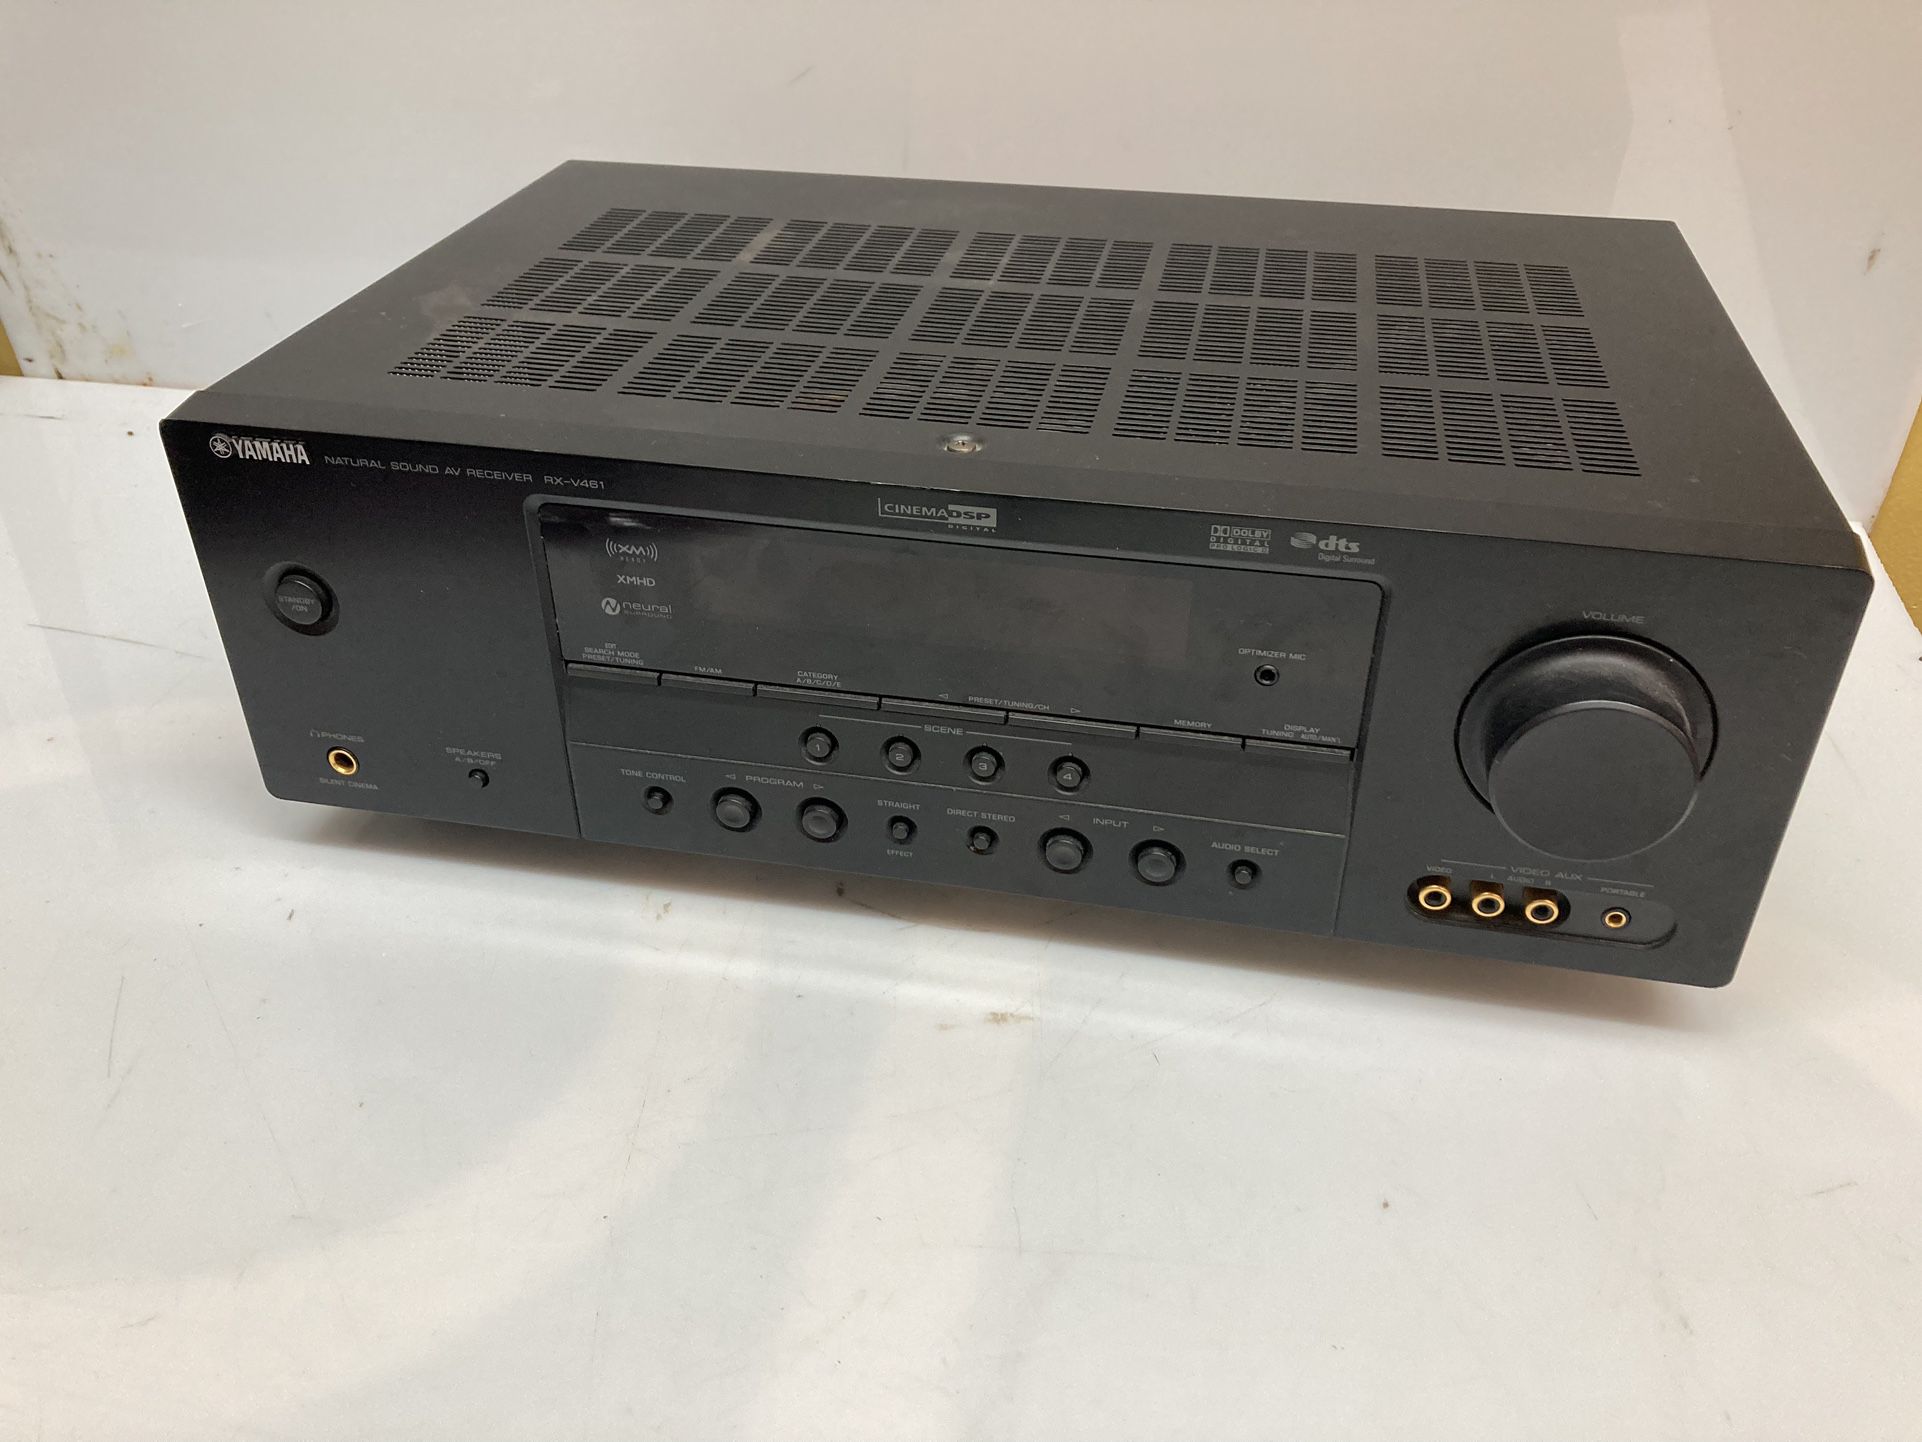 Yamaha RX-V461 5.1 Channel 500 Watts Receiver 